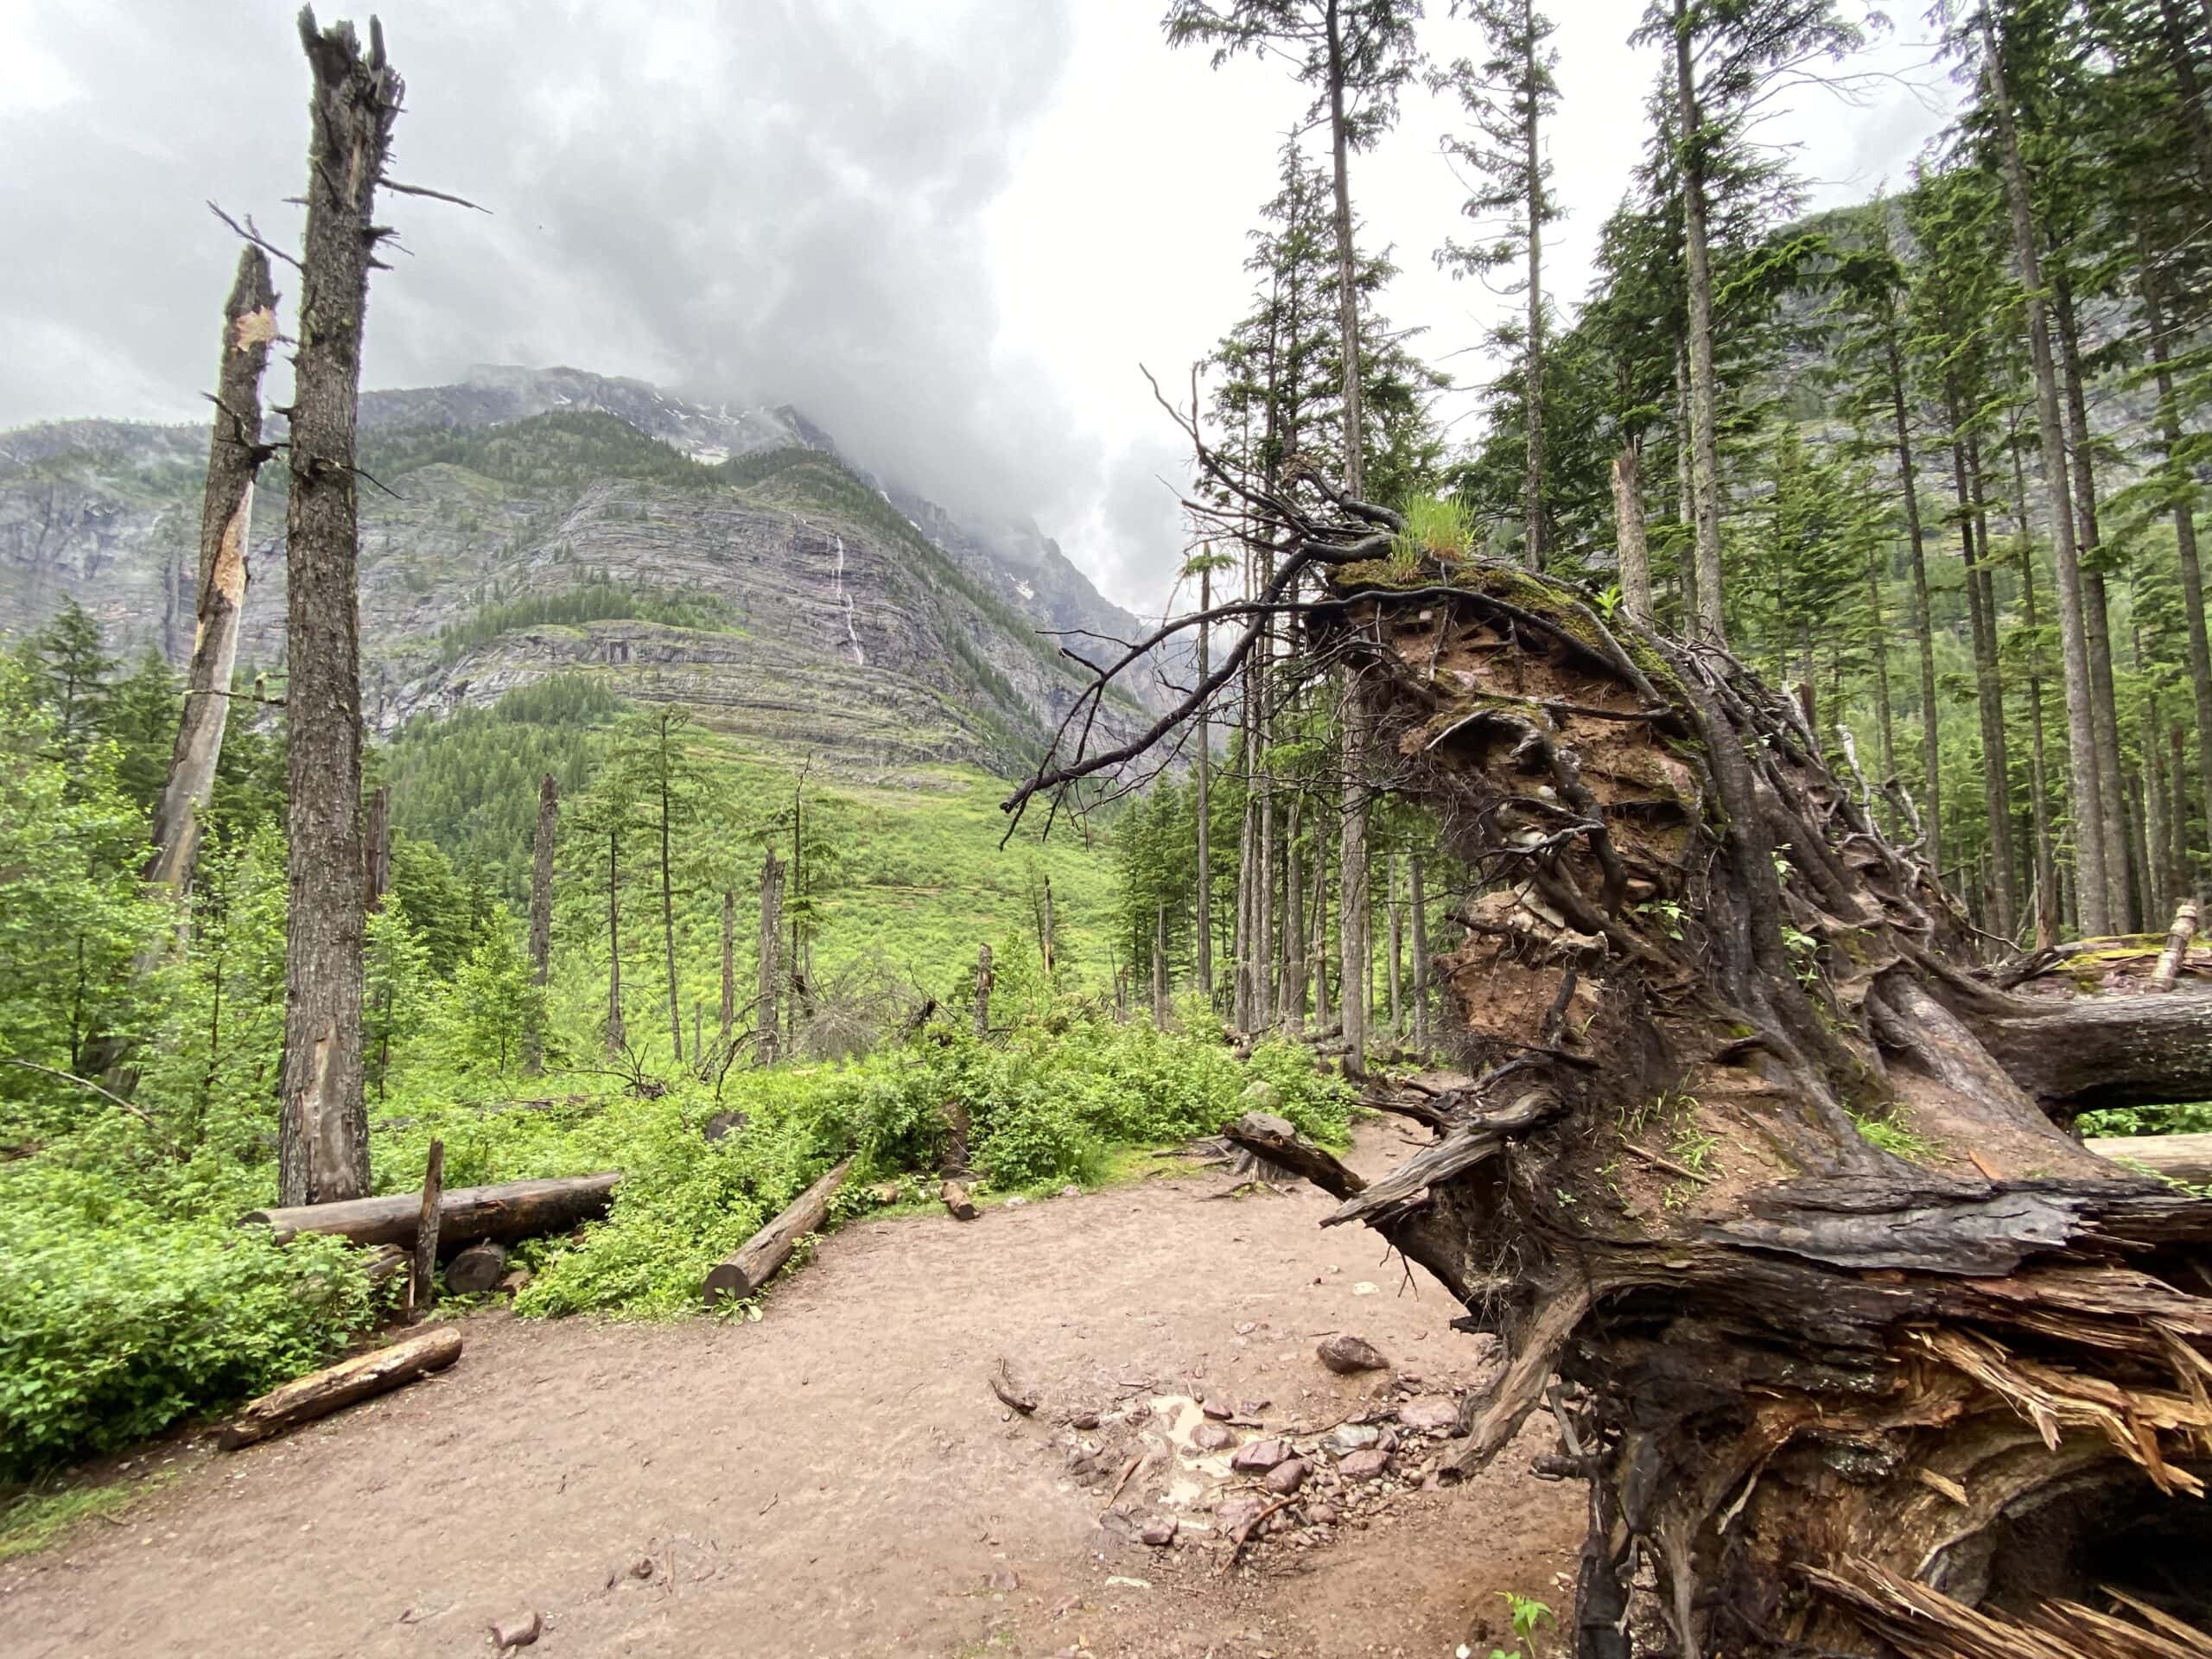 The Avalanche Lake Trail winds its way through mountains and fallen trees